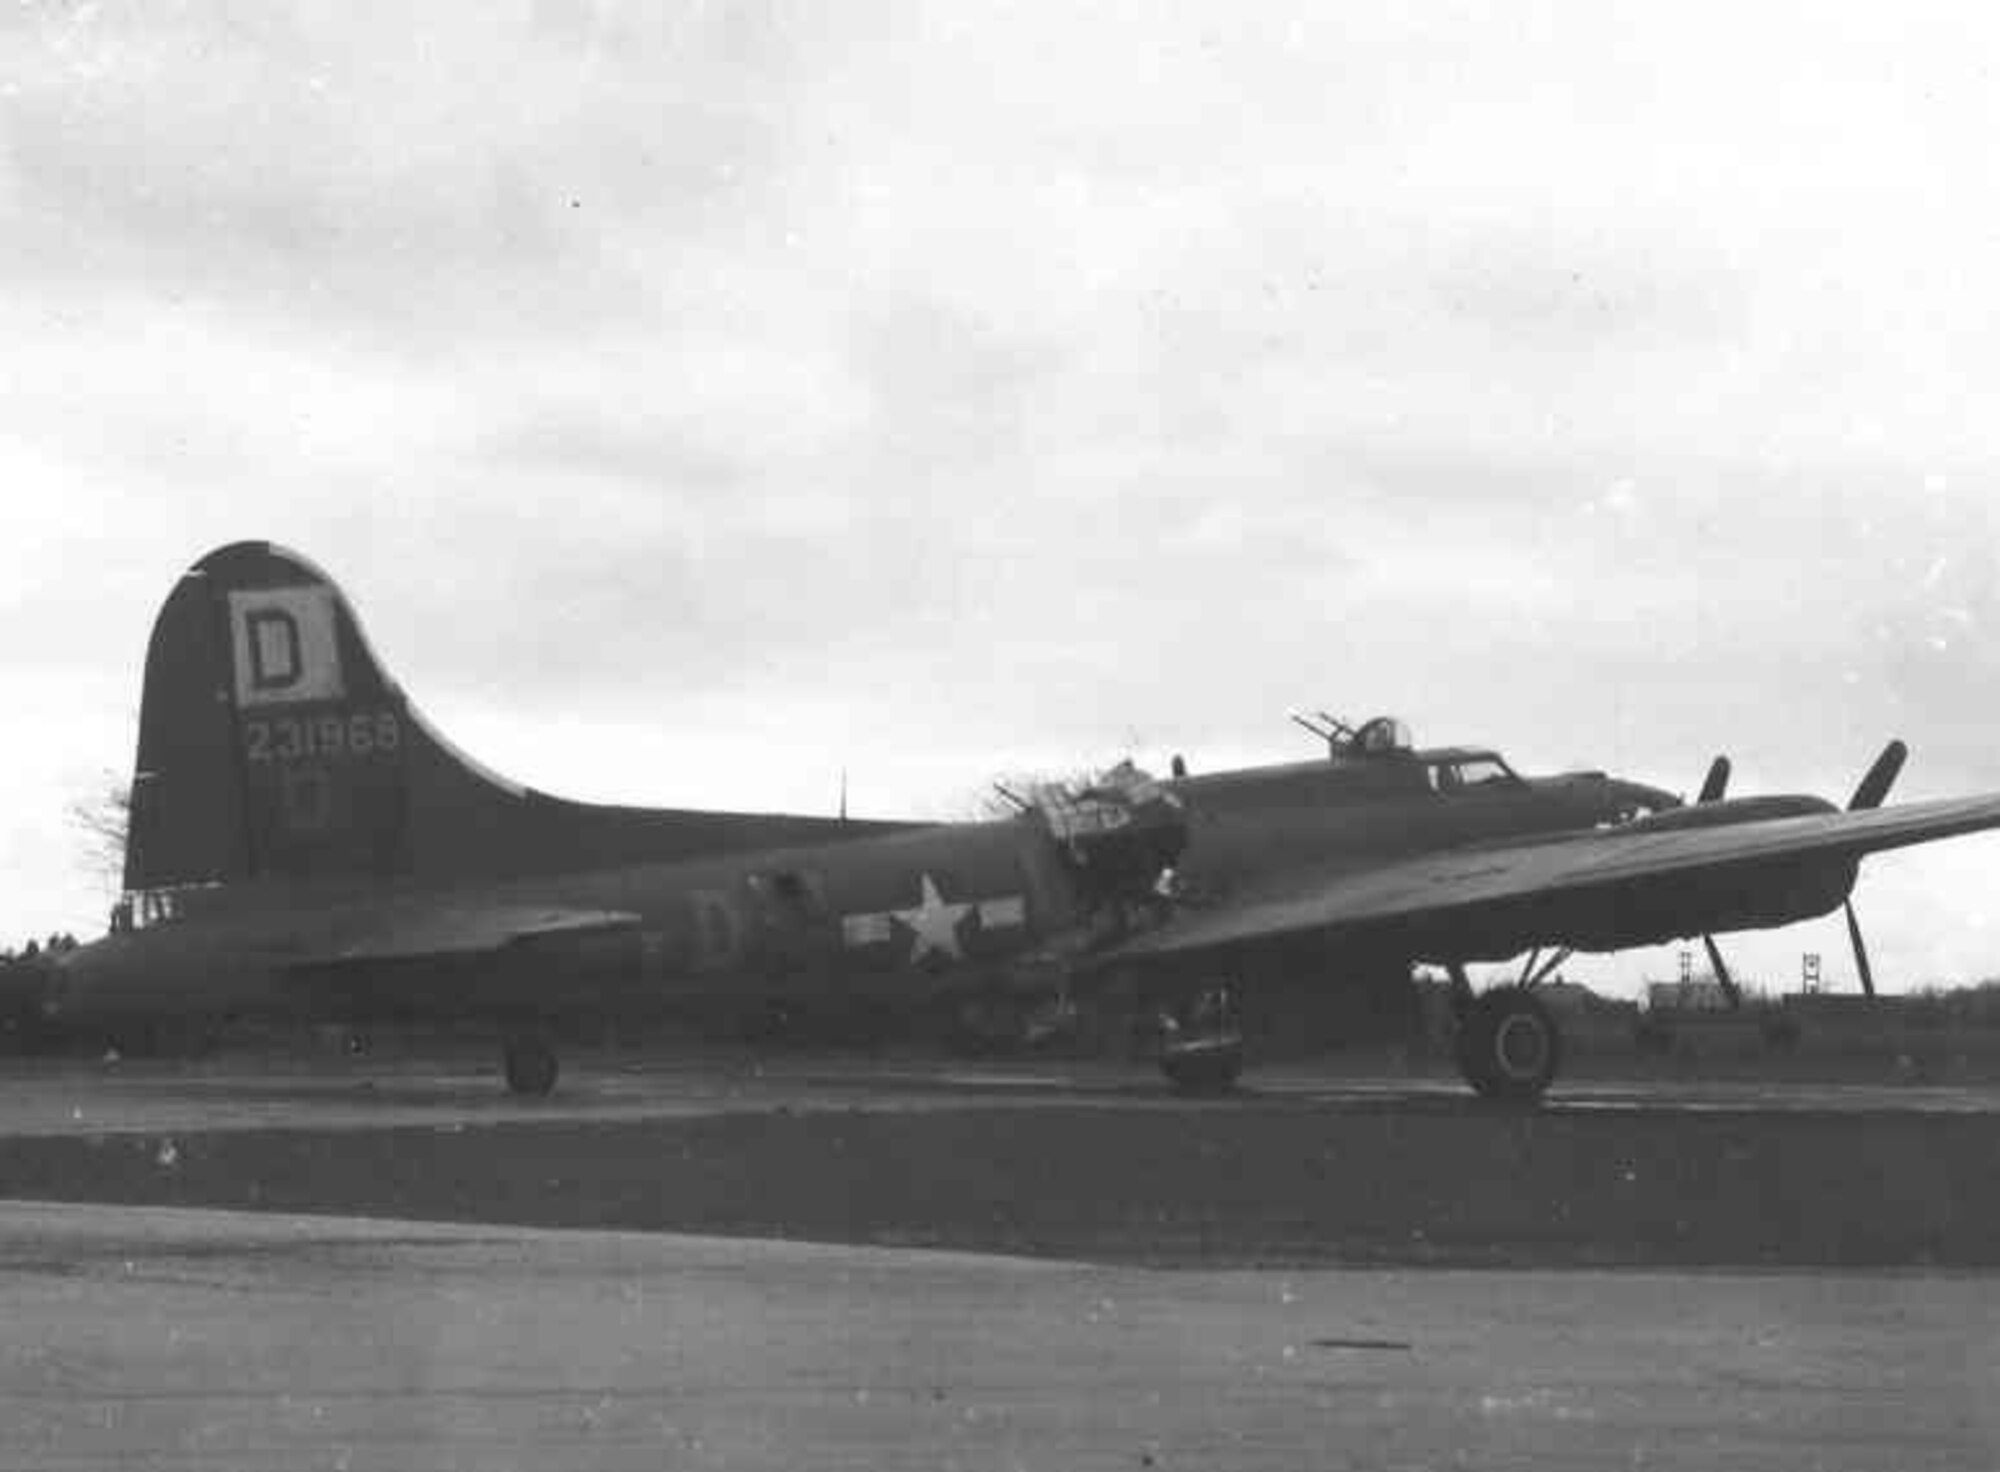 The original “Miss Irish,” B-17 Flying Fortress shows the severe battle damage sustained when an 88 mm flack shell blew a 7-foot by 12-foot hole in the floor, roof and side of the aircraft March 19, 1944. Despite the damage, the aircrew ensured Miss Irish went on to complete the mission, and the pilot, Capt. John P. Gibbons, managed to emergency land the plane at RAF Raydon, Suffolk. (Photo courtesy of 100th Bomb Group Foundation archives)